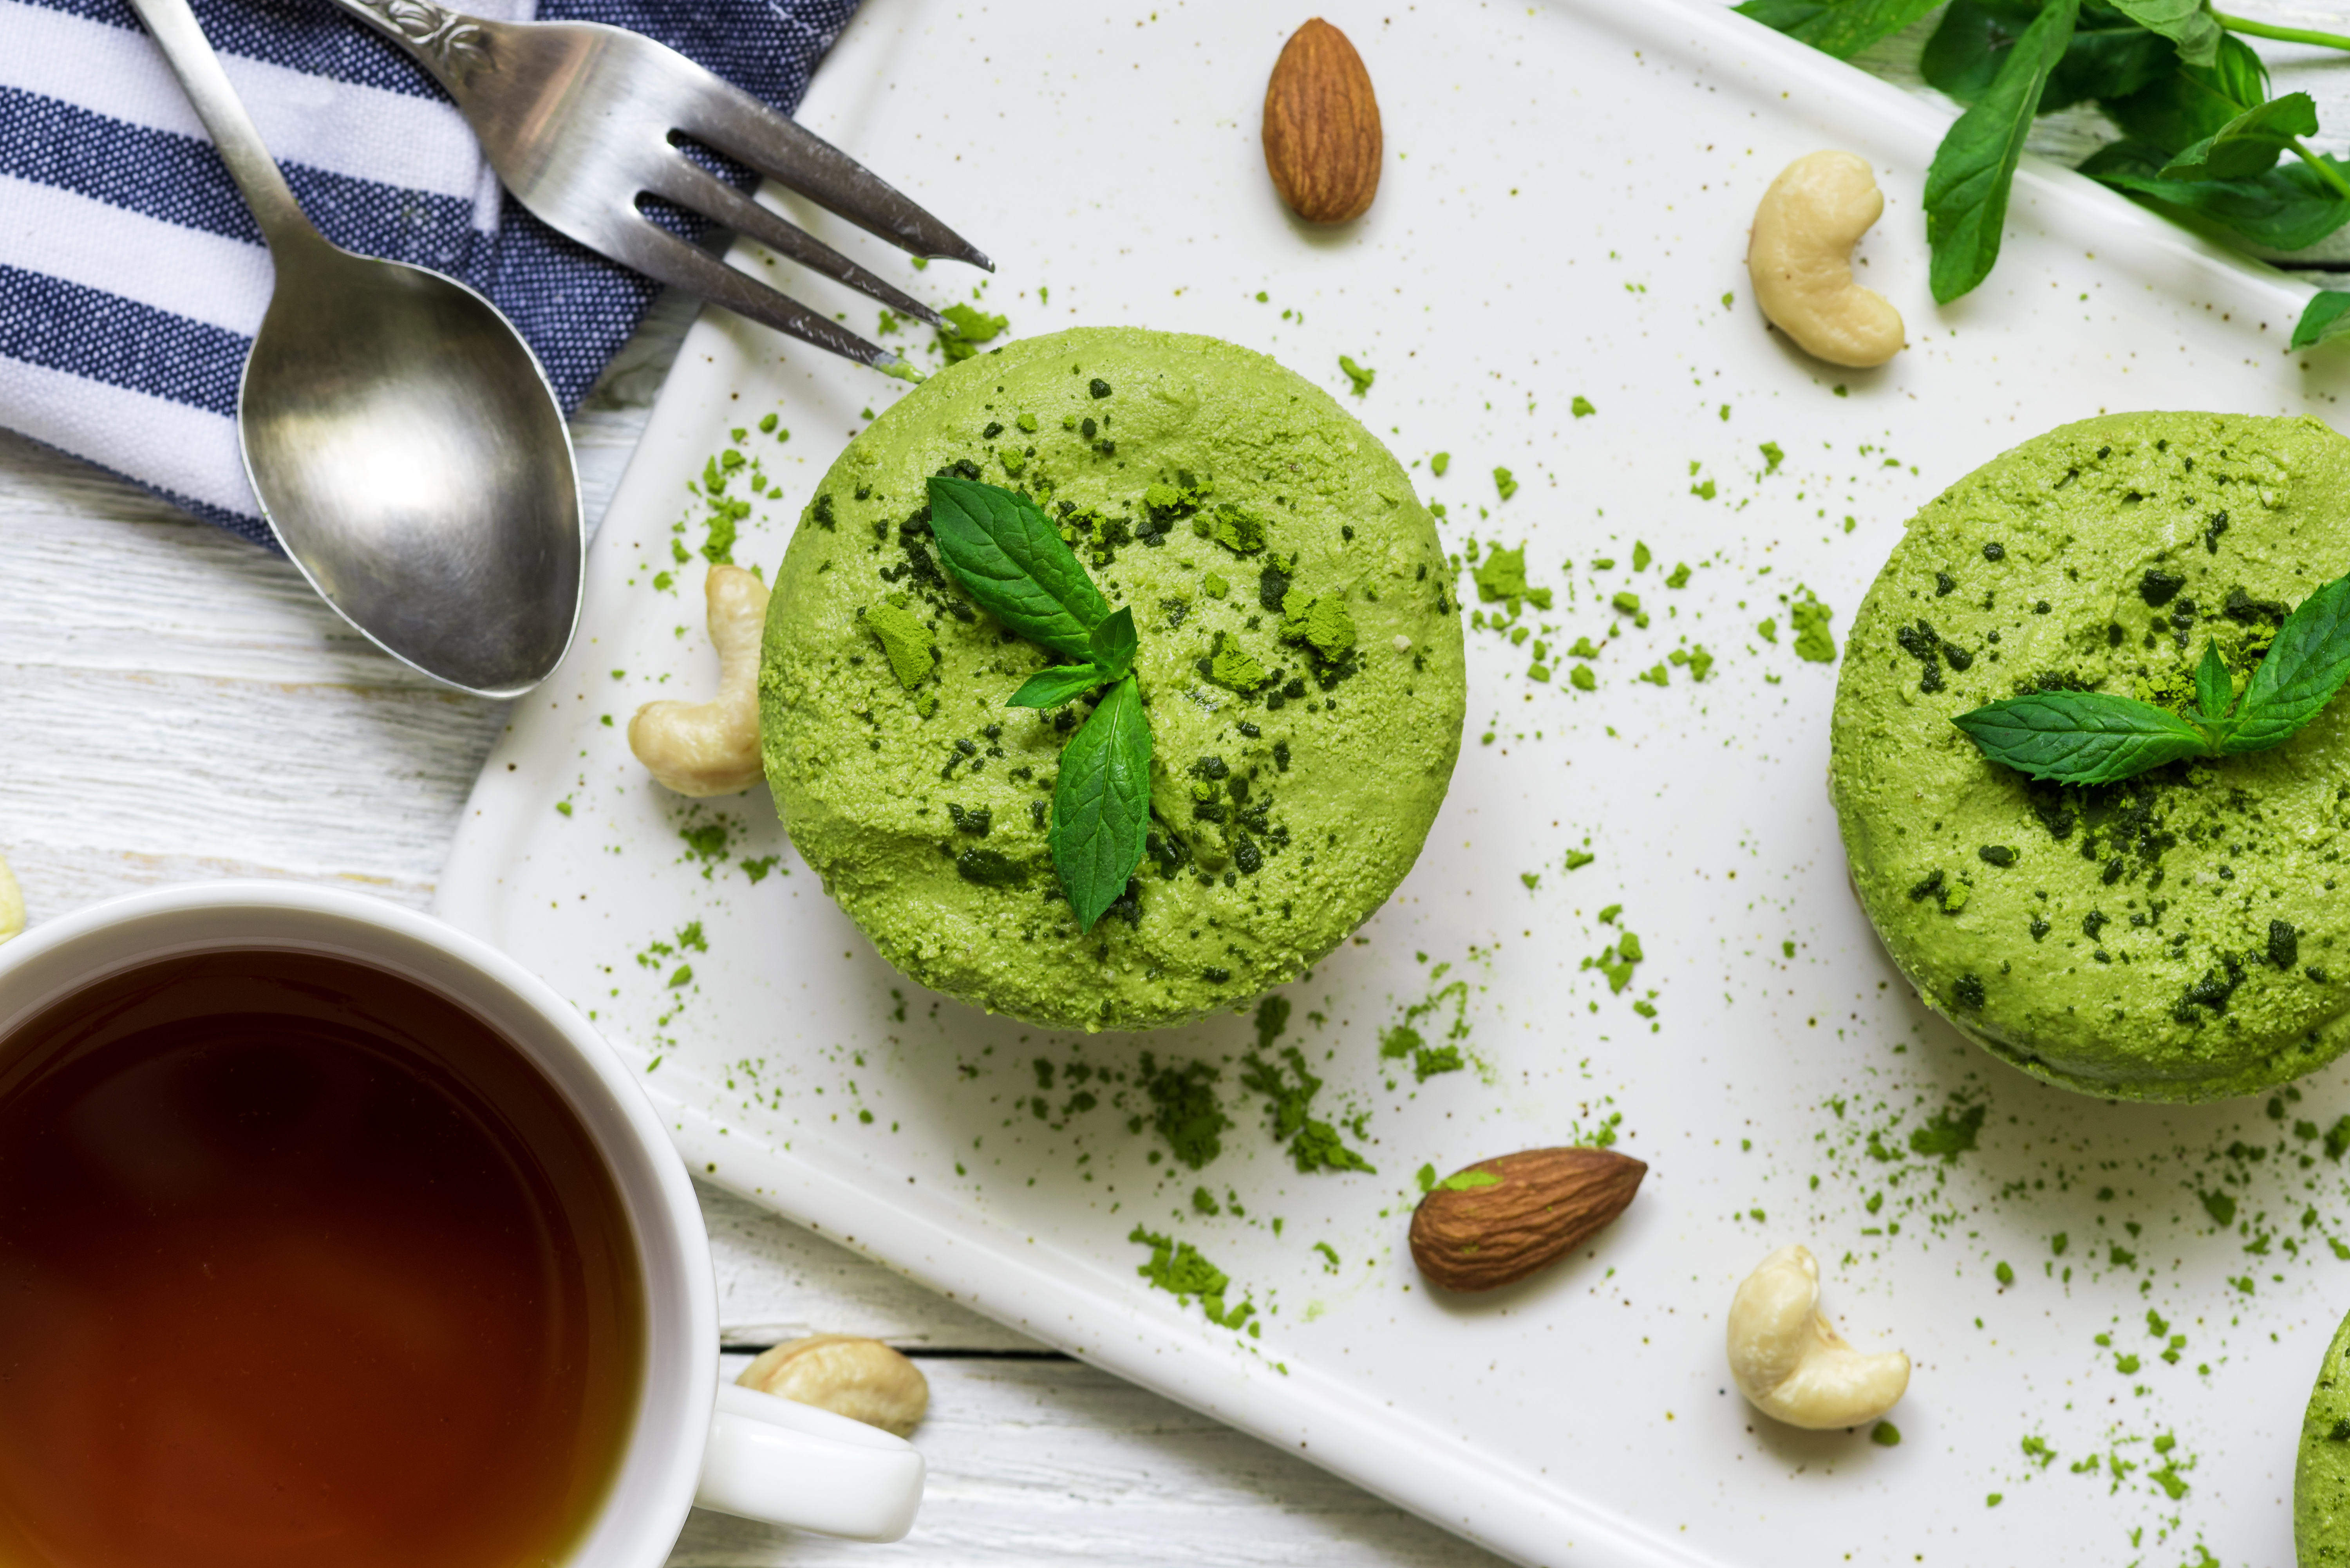 green matcha and banana vegan raw cheesecakes with mint and nuts over white wooden table with cup of tea and spoon. healthy delicious breakfast. top view